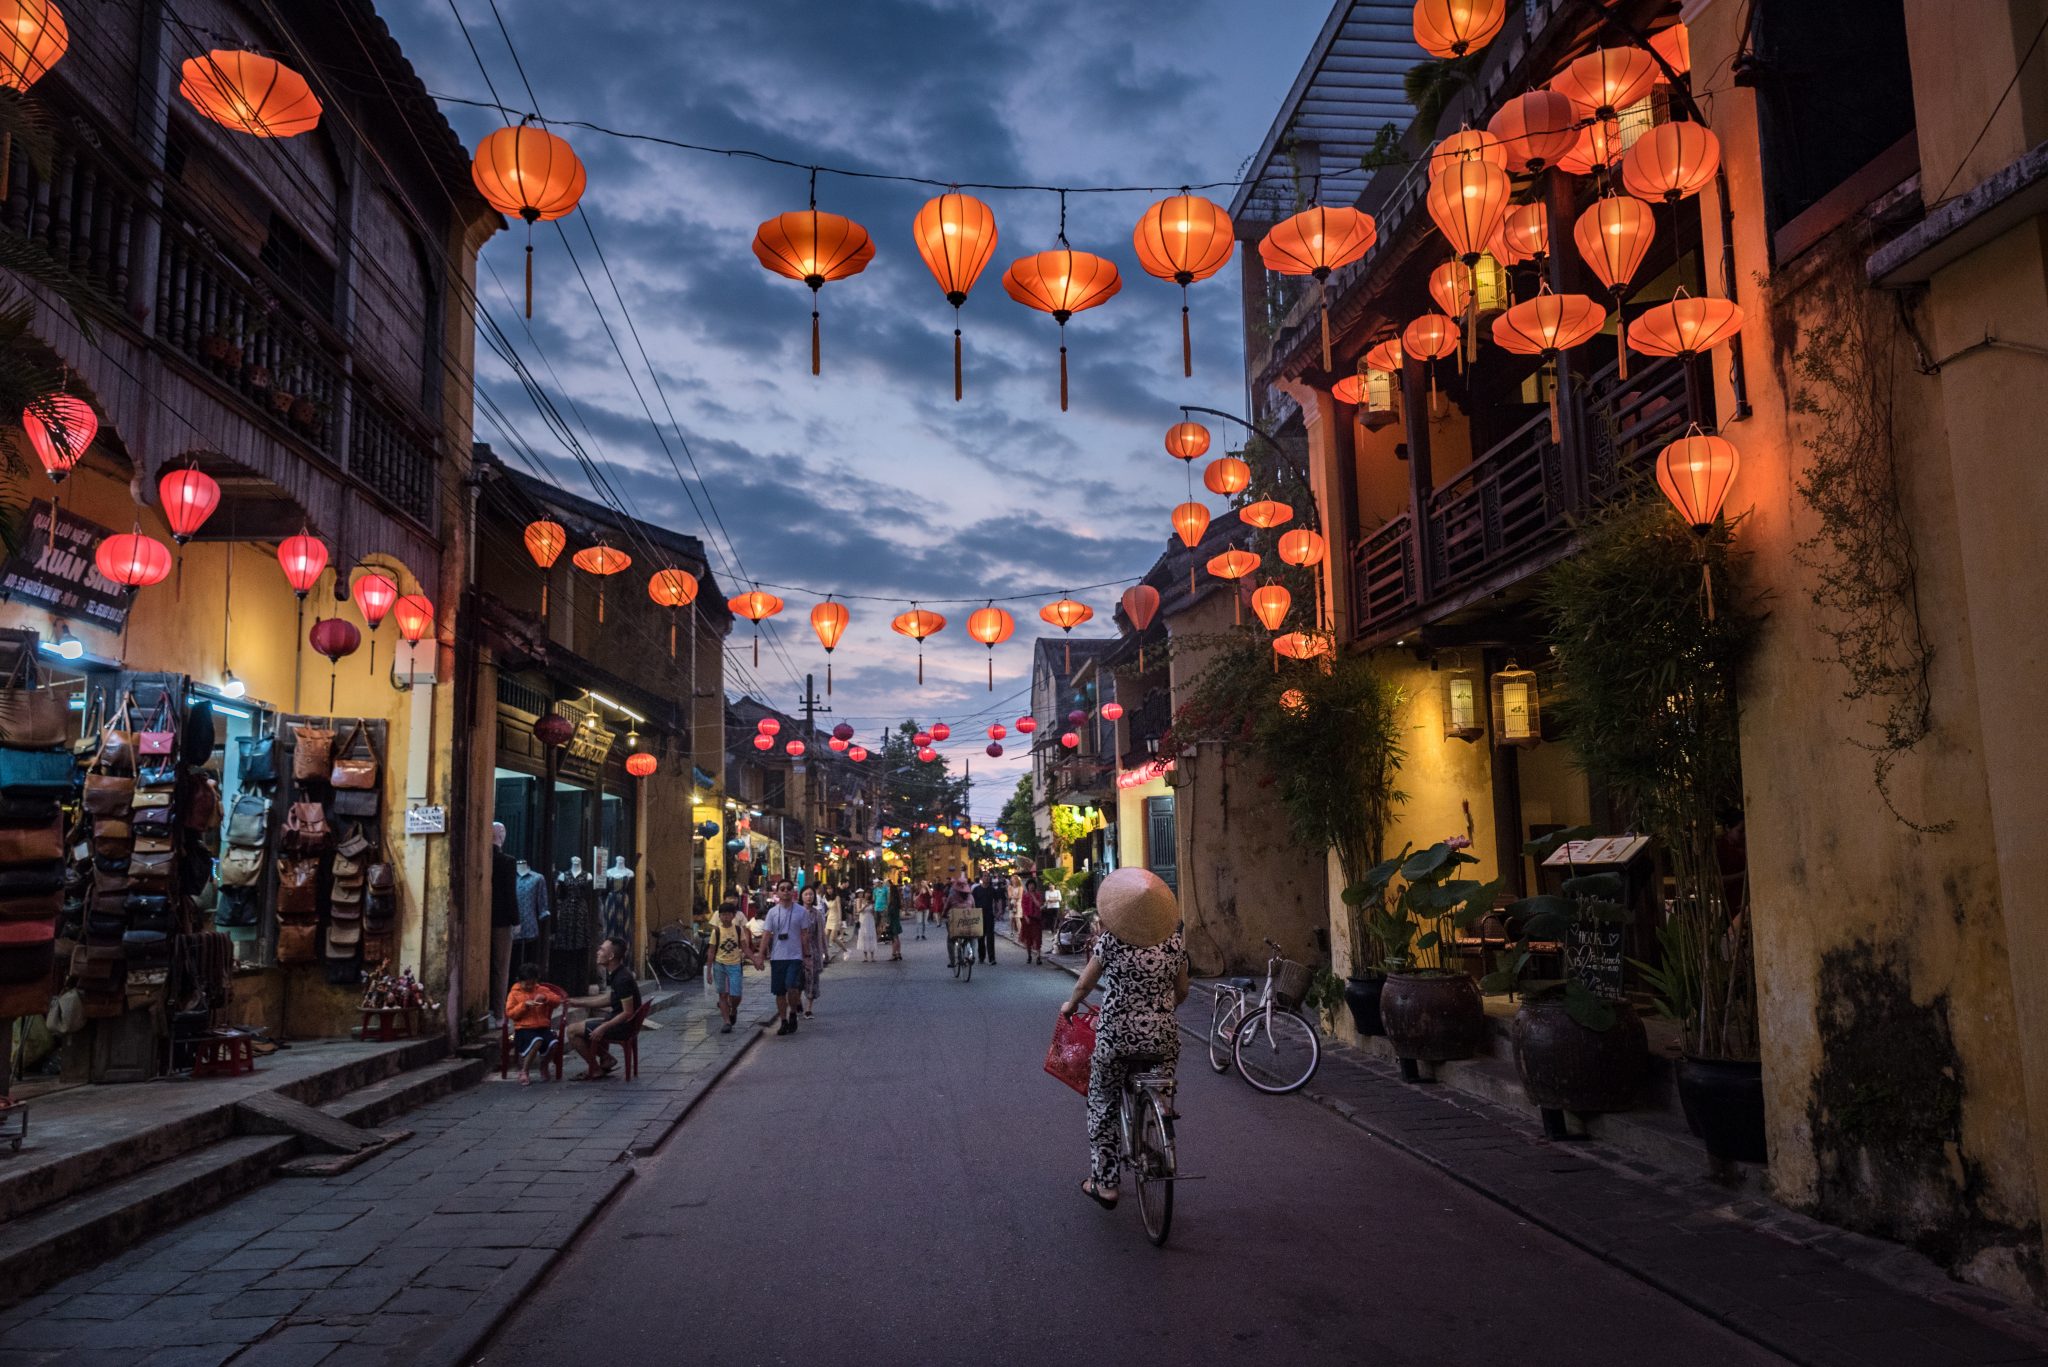 Hoi An, Vietnam, street, lantern, lanterns, lights, chinese, colorful, old, city, tourism, tourist,hat, bycicle,